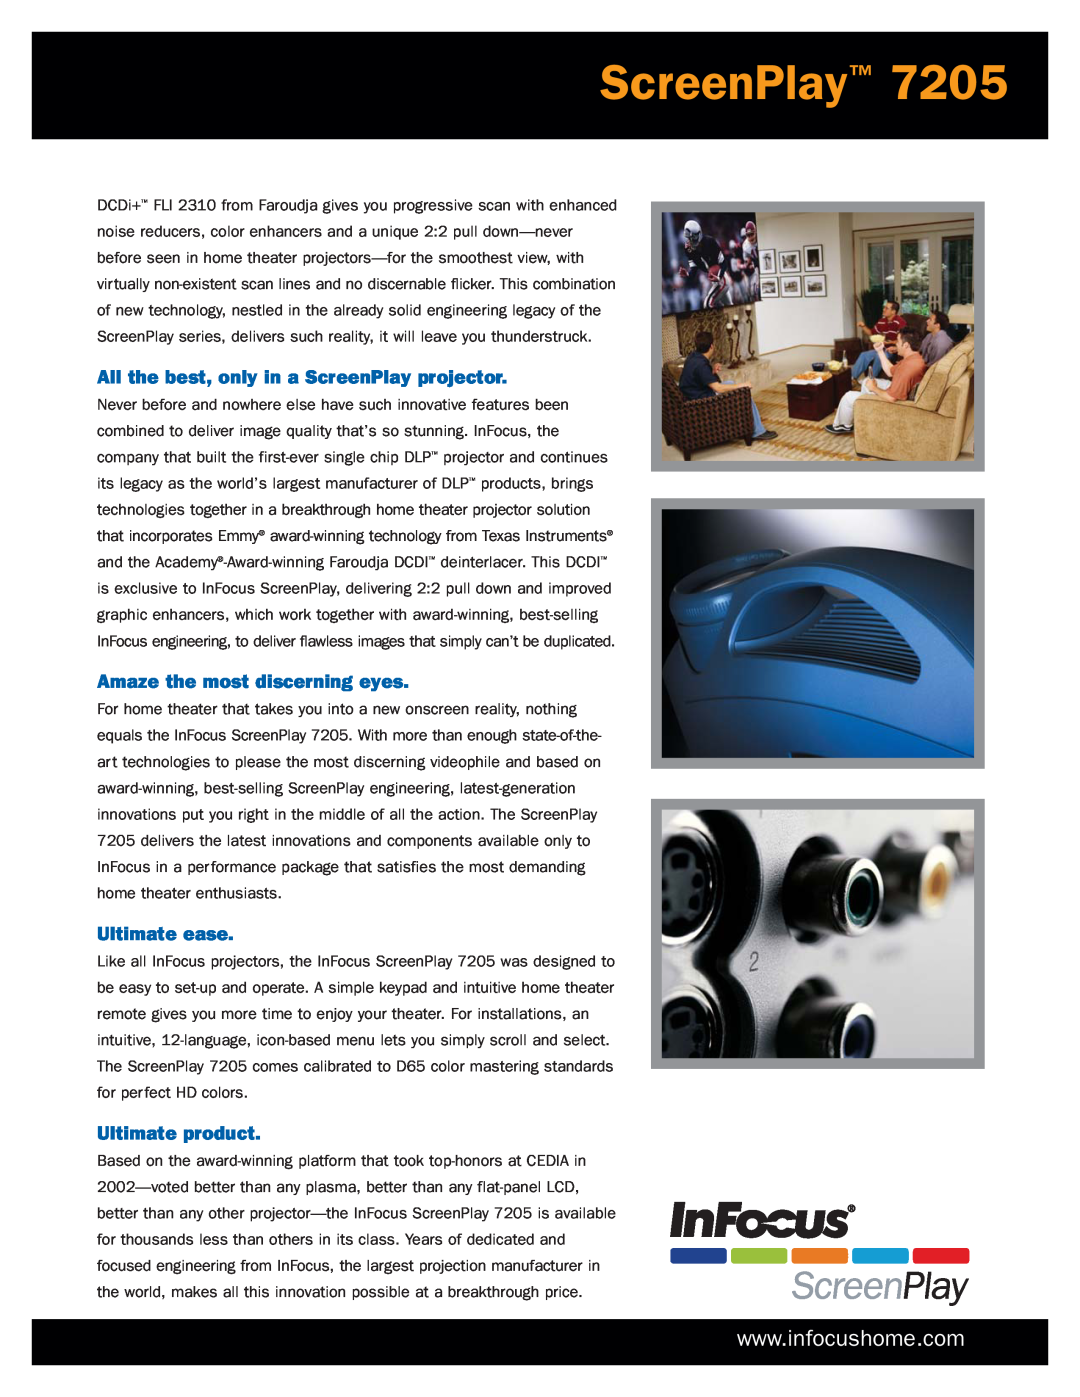 InFocus 7205 All the best, only in a ScreenPlay projector, Amaze the most discerning eyes, Ultimate ease, Ultimate product 